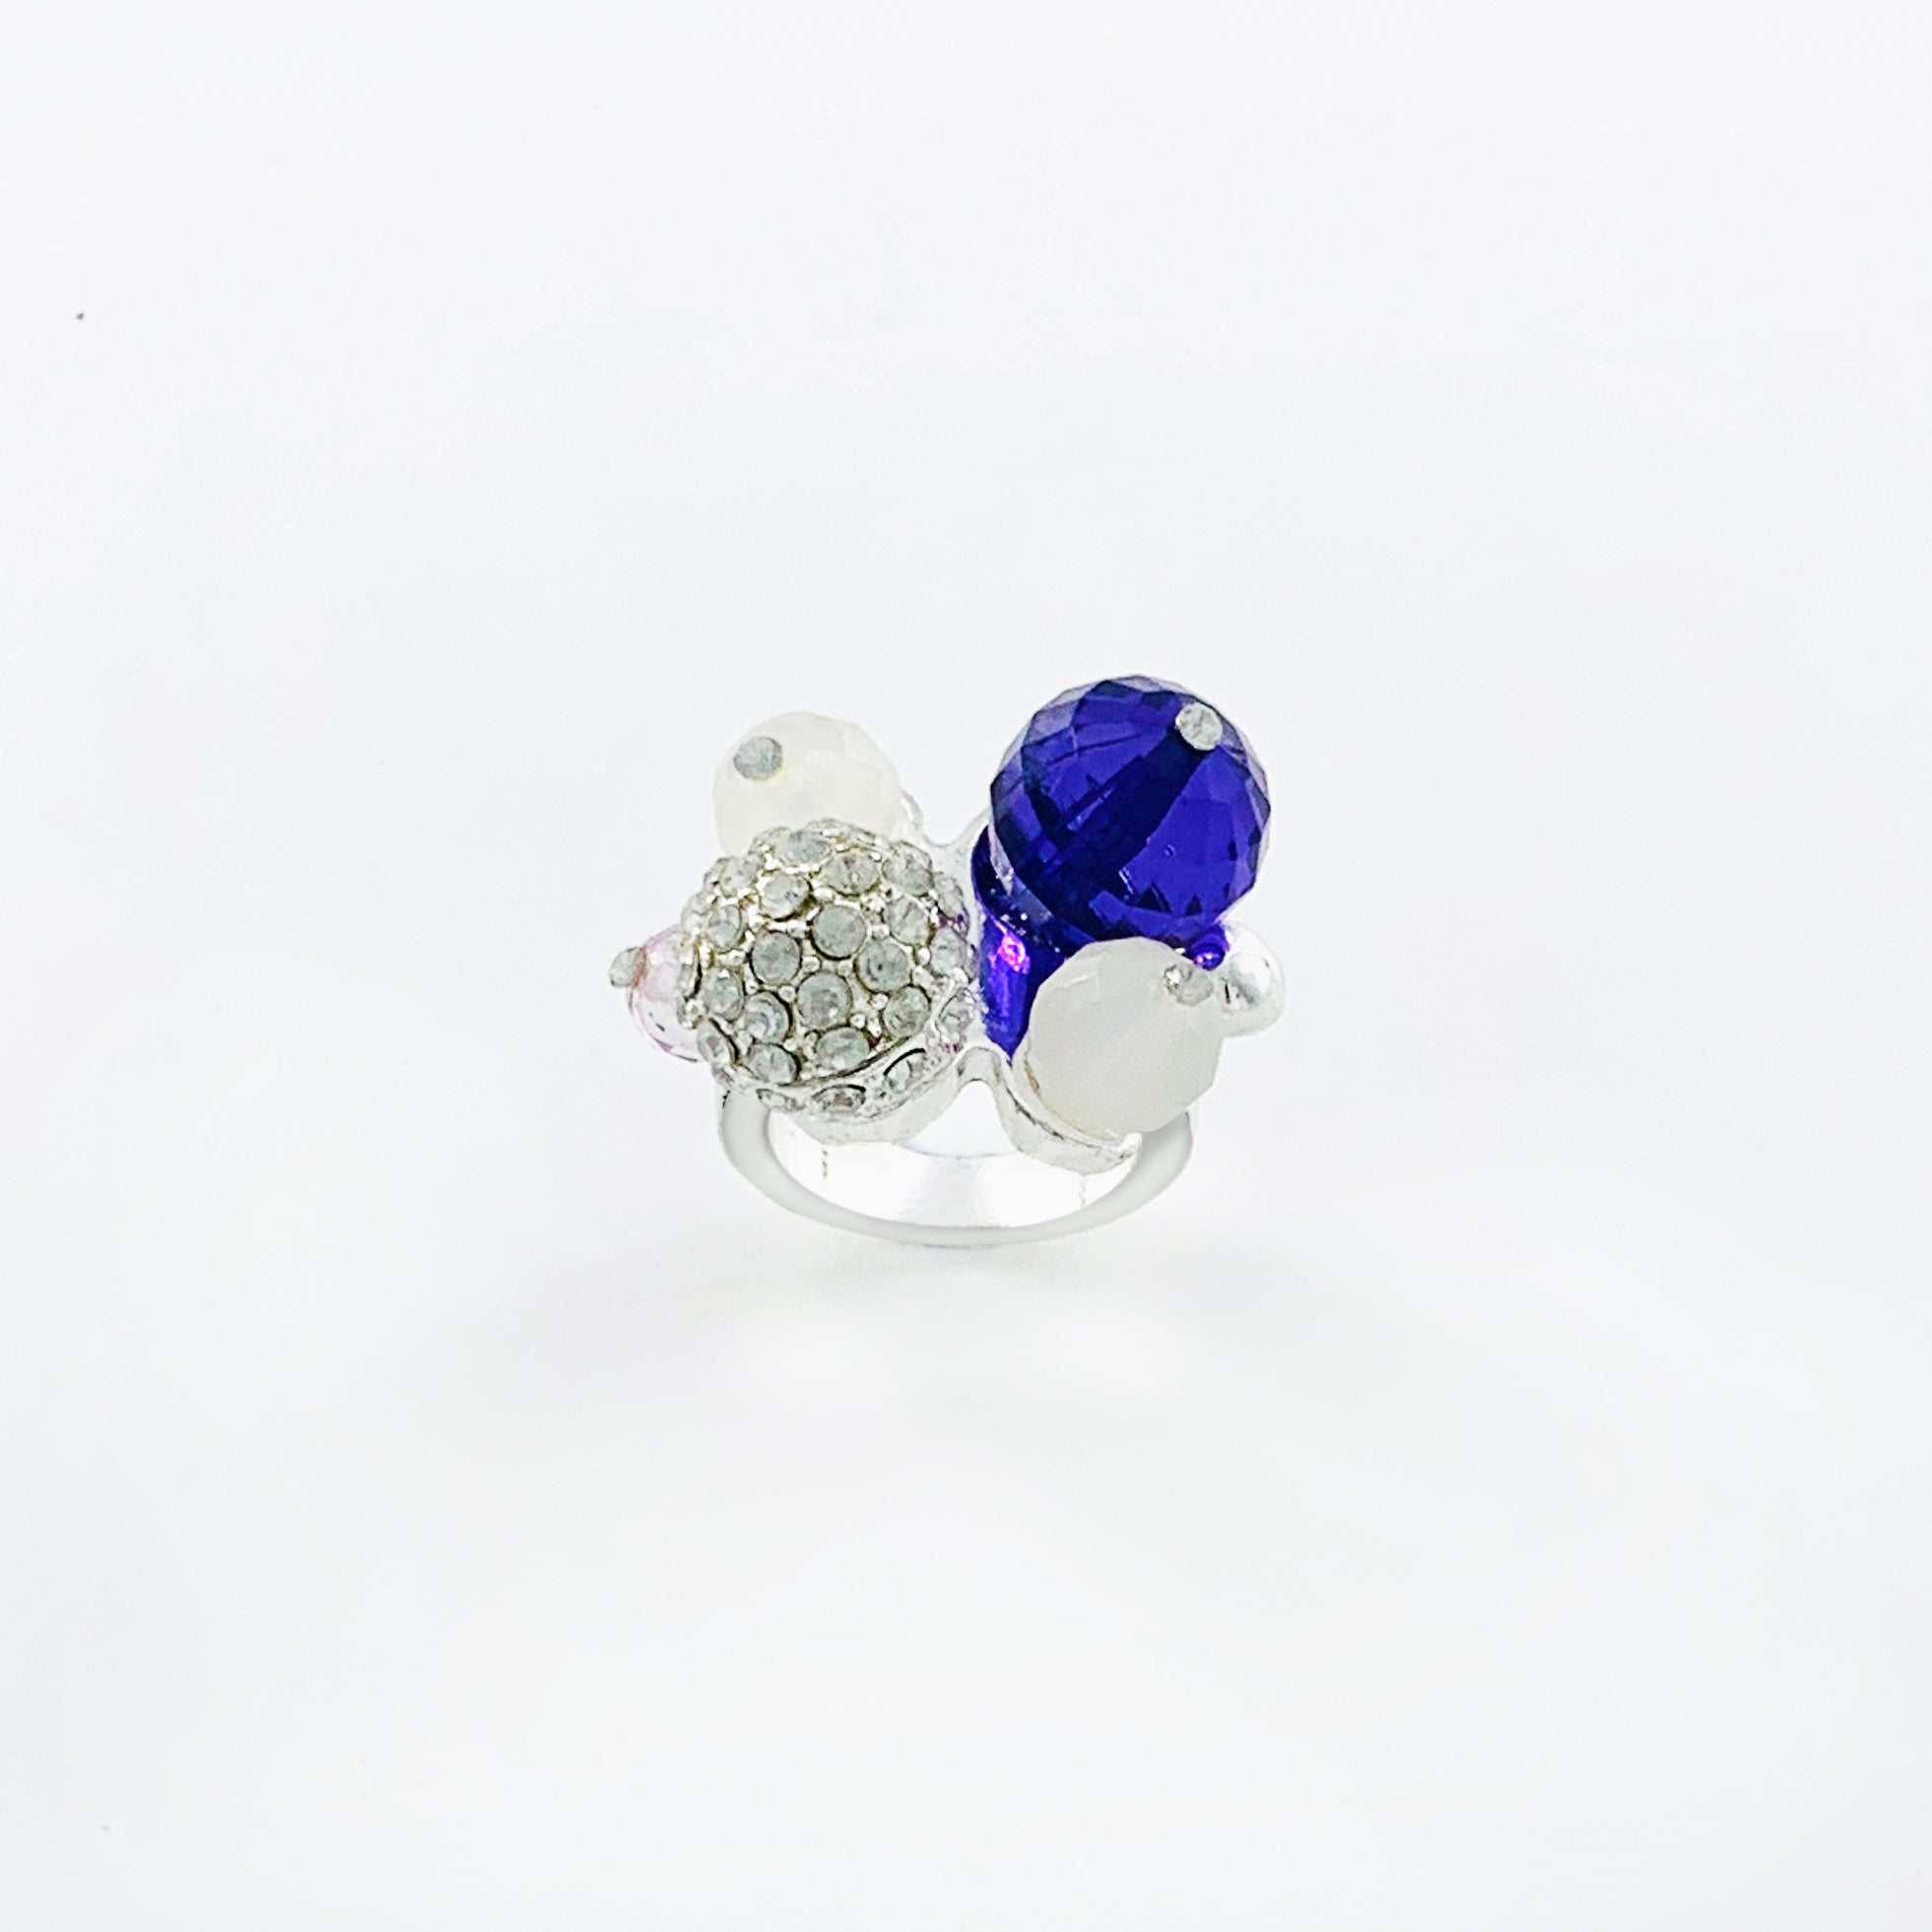 Silver ring with cluster of coloured stones and diamantes